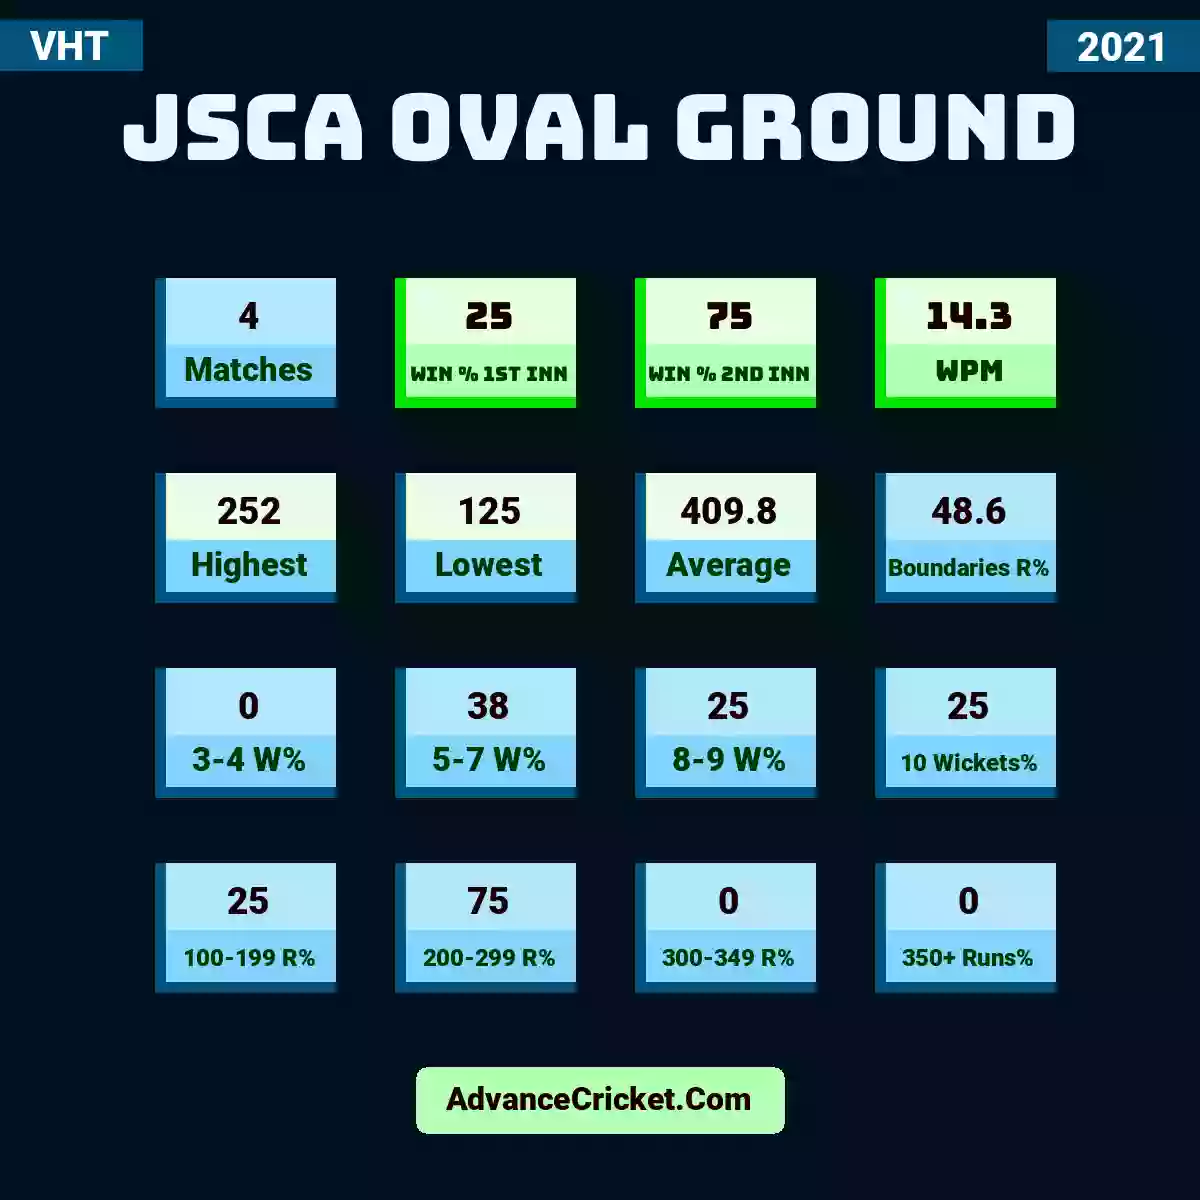 Image showing JSCA Oval Ground with Matches: 4, Win % 1st Inn: 25, Win % 2nd Inn: 75, WPM: 14.3, Highest: 252, Lowest: 125, Average: 409.8, Boundaries R%: 48.6, 3-4 W%: 0, 5-7 W%: 38, 8-9 W%: 25, 10 Wickets%: 25, 100-199 R%: 25, 200-299 R%: 75, 300-349 R%: 0, 350+ Runs%: 0.